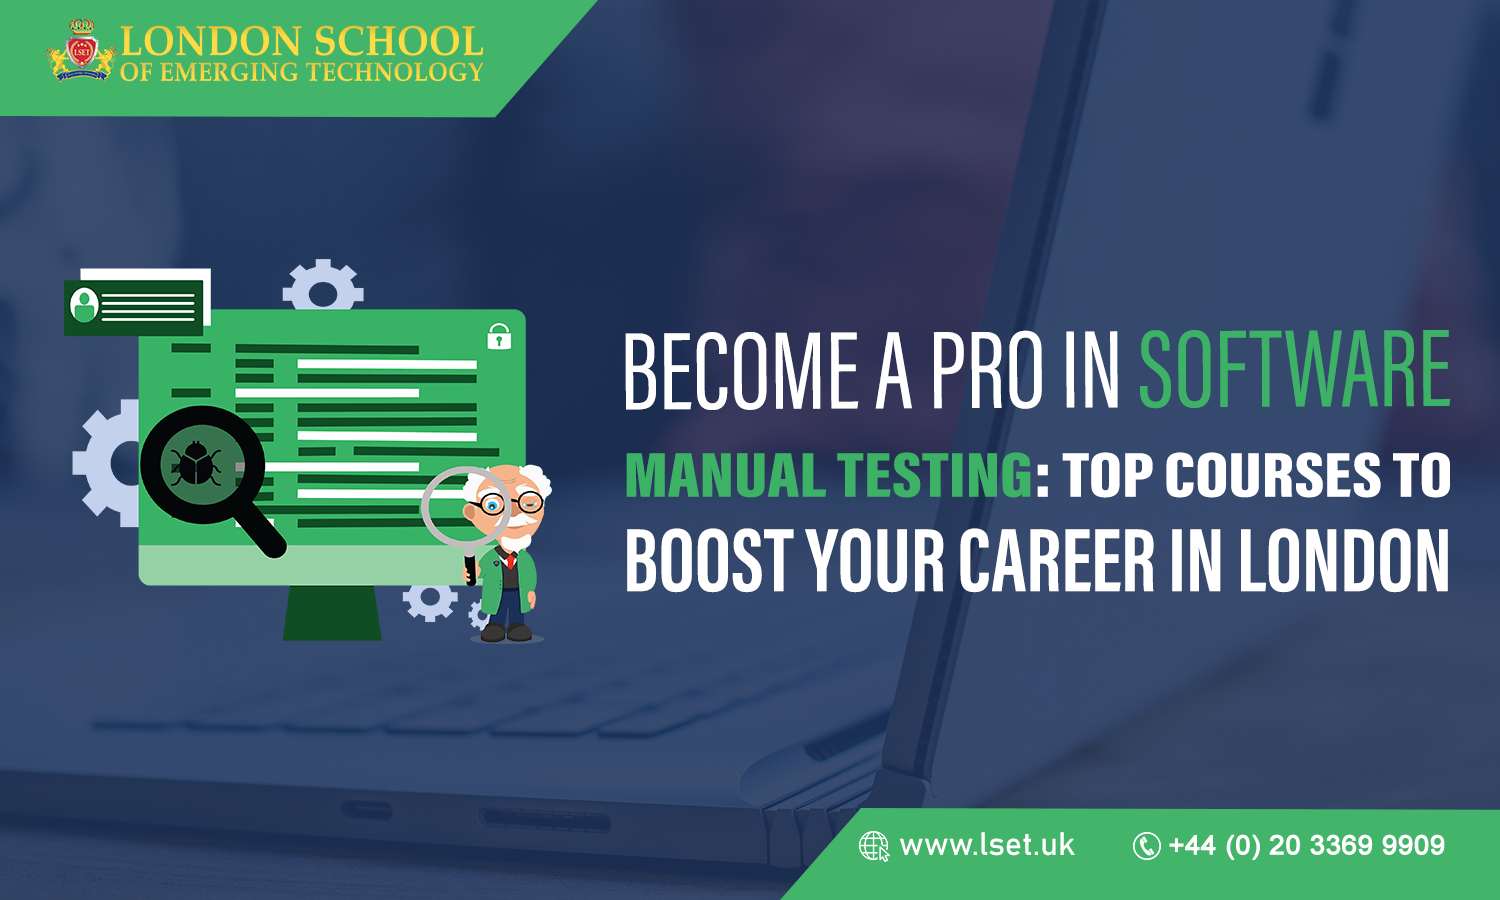 Become a Pro in Software Manual Testing Top Courses to Boost Your Career in London